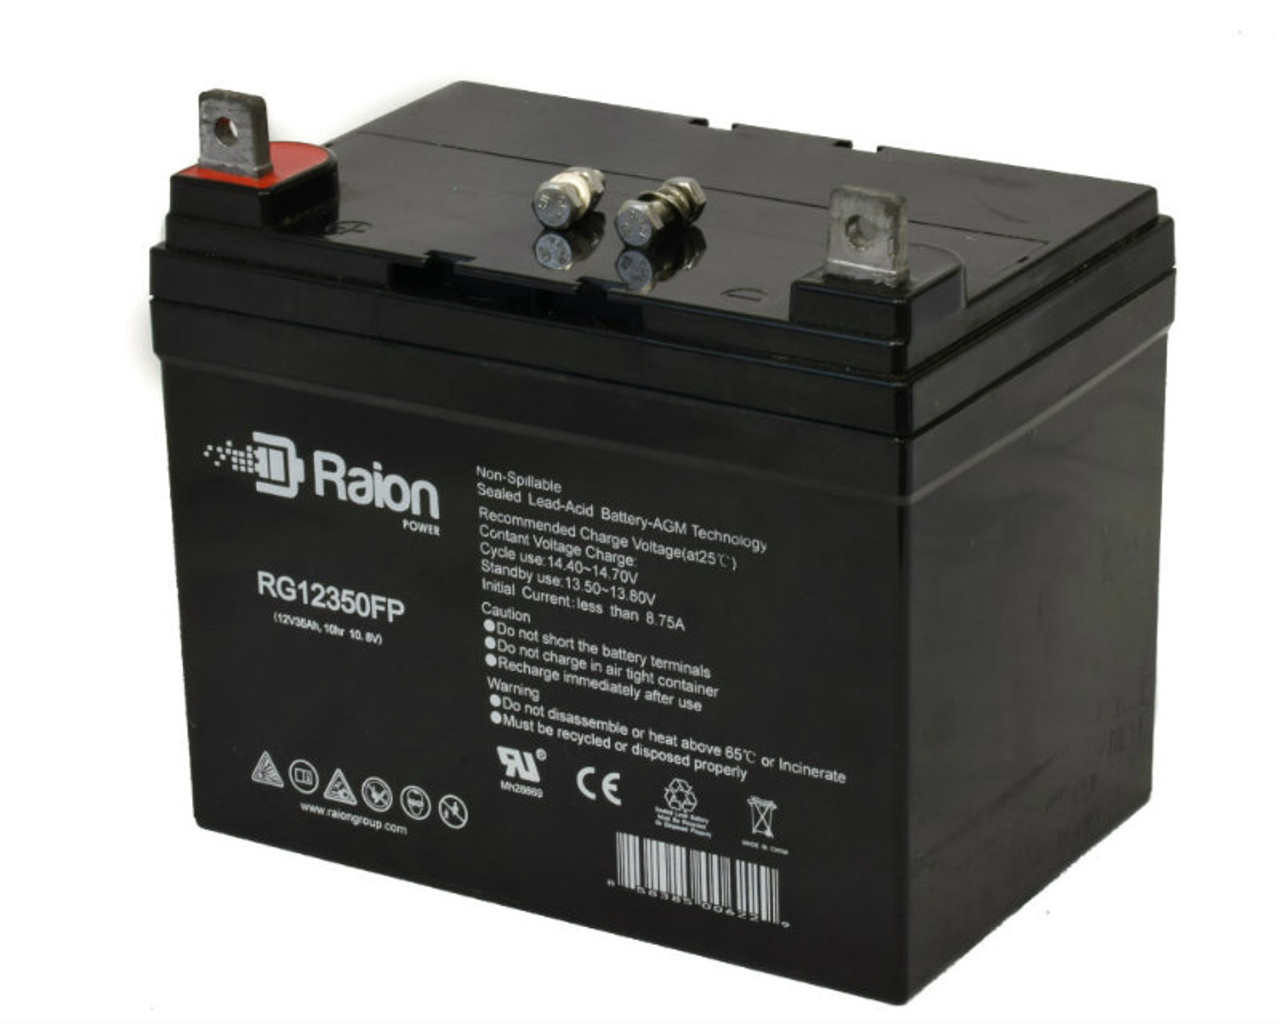 Raion Power Replacement 12V 35Ah RG12350FP Mobility Scooter Battery for A-BEC Suntech Scoota Plus Wide